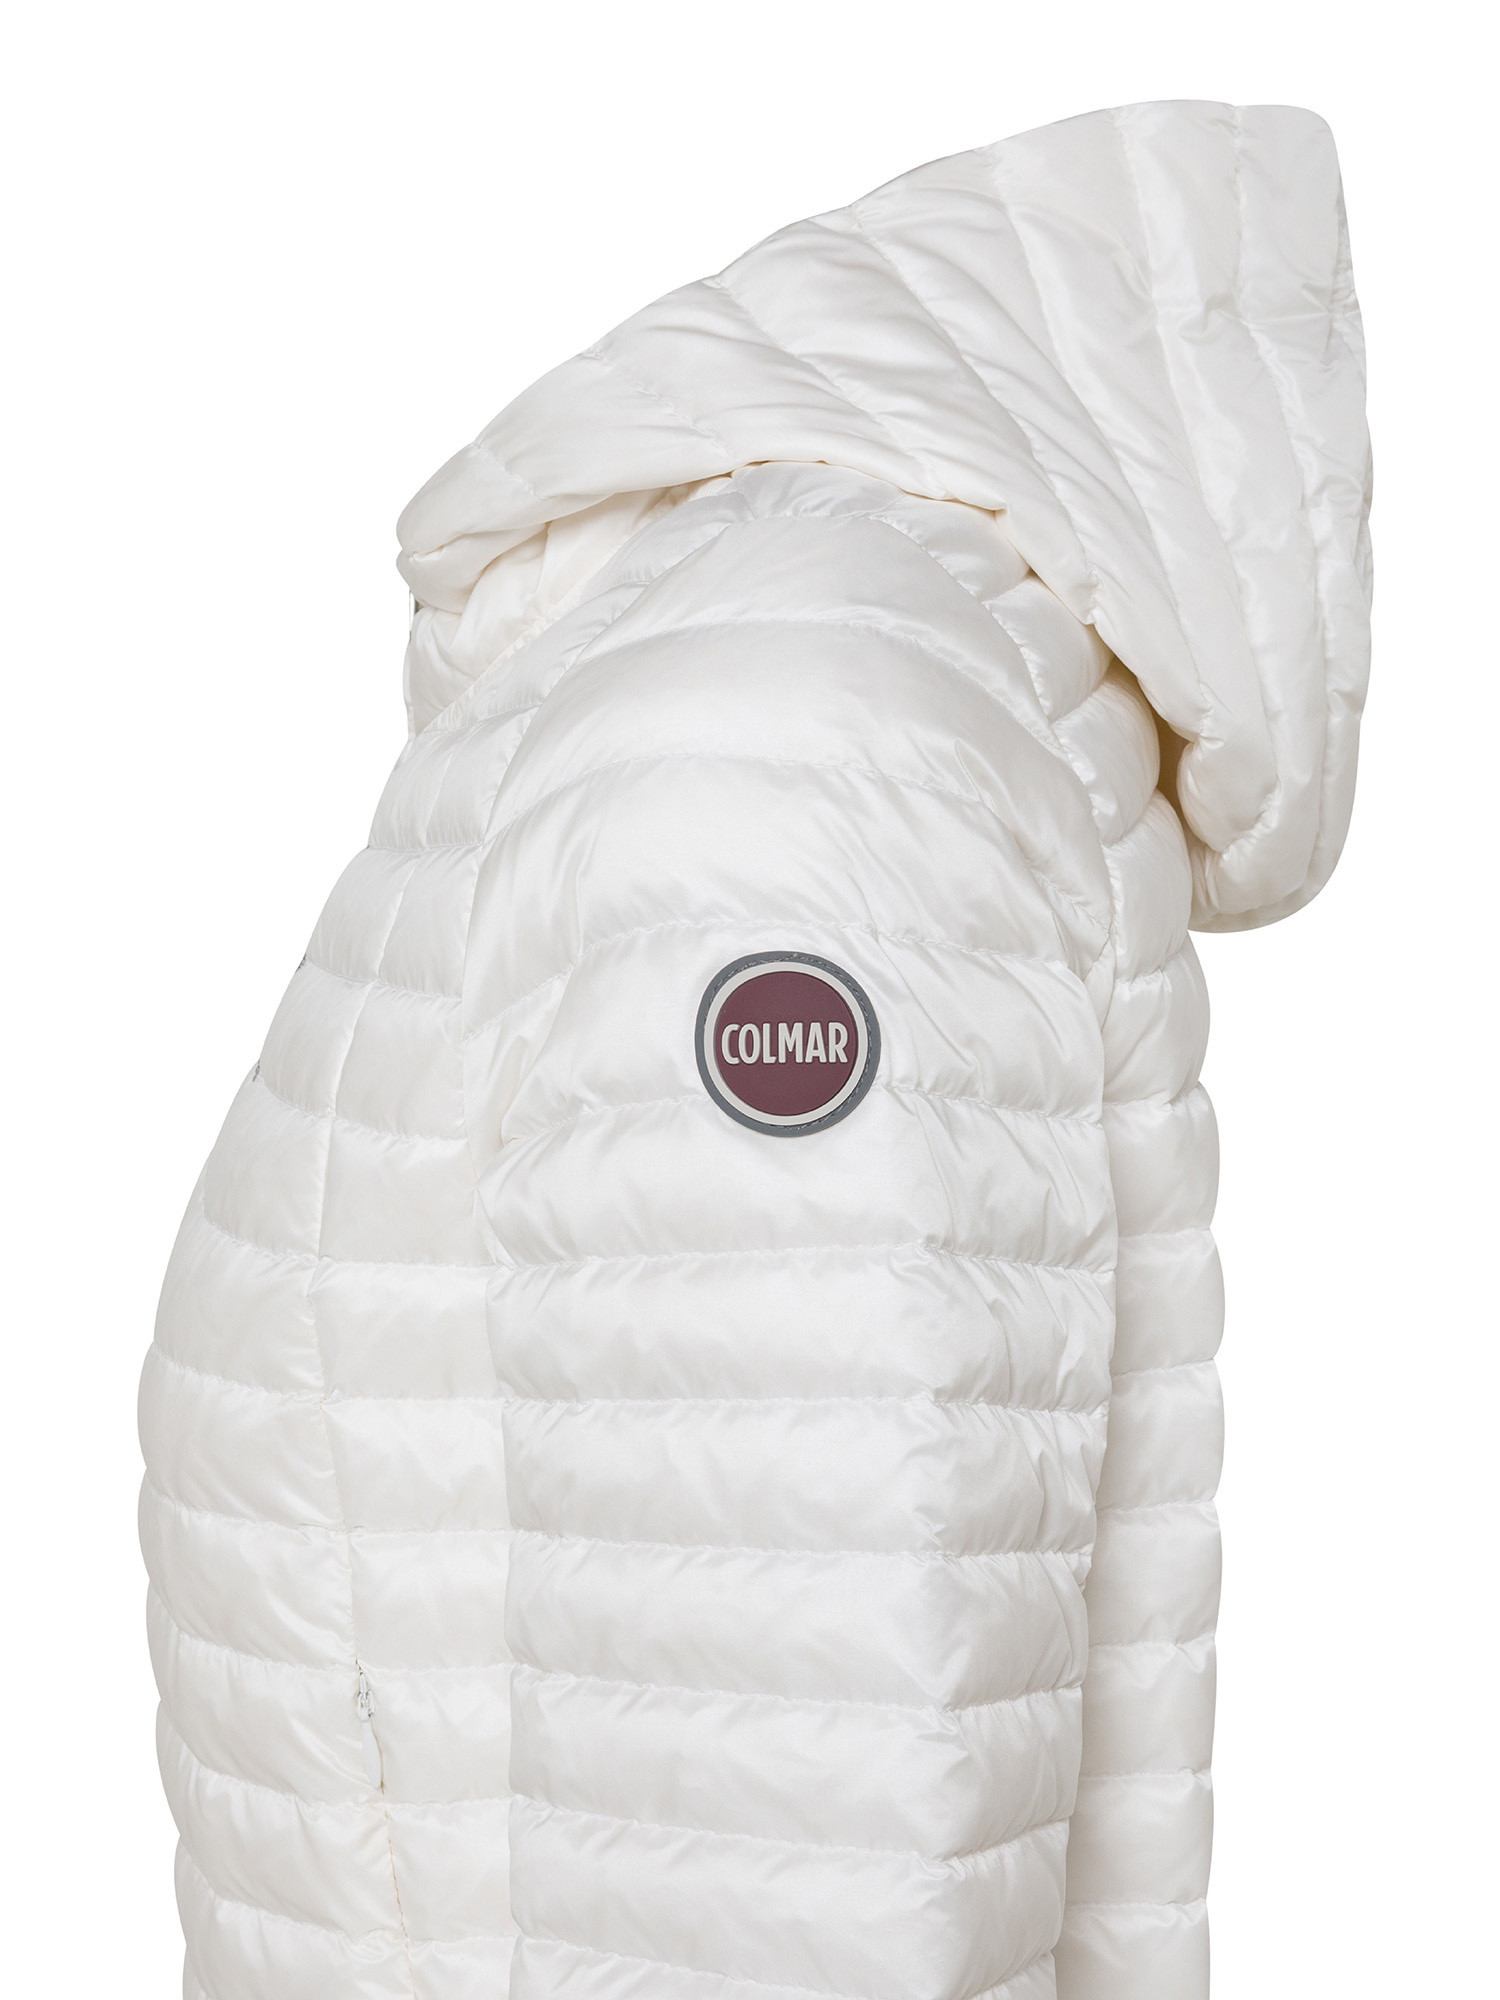 Colmar - Down jacket with hood, White, large image number 2